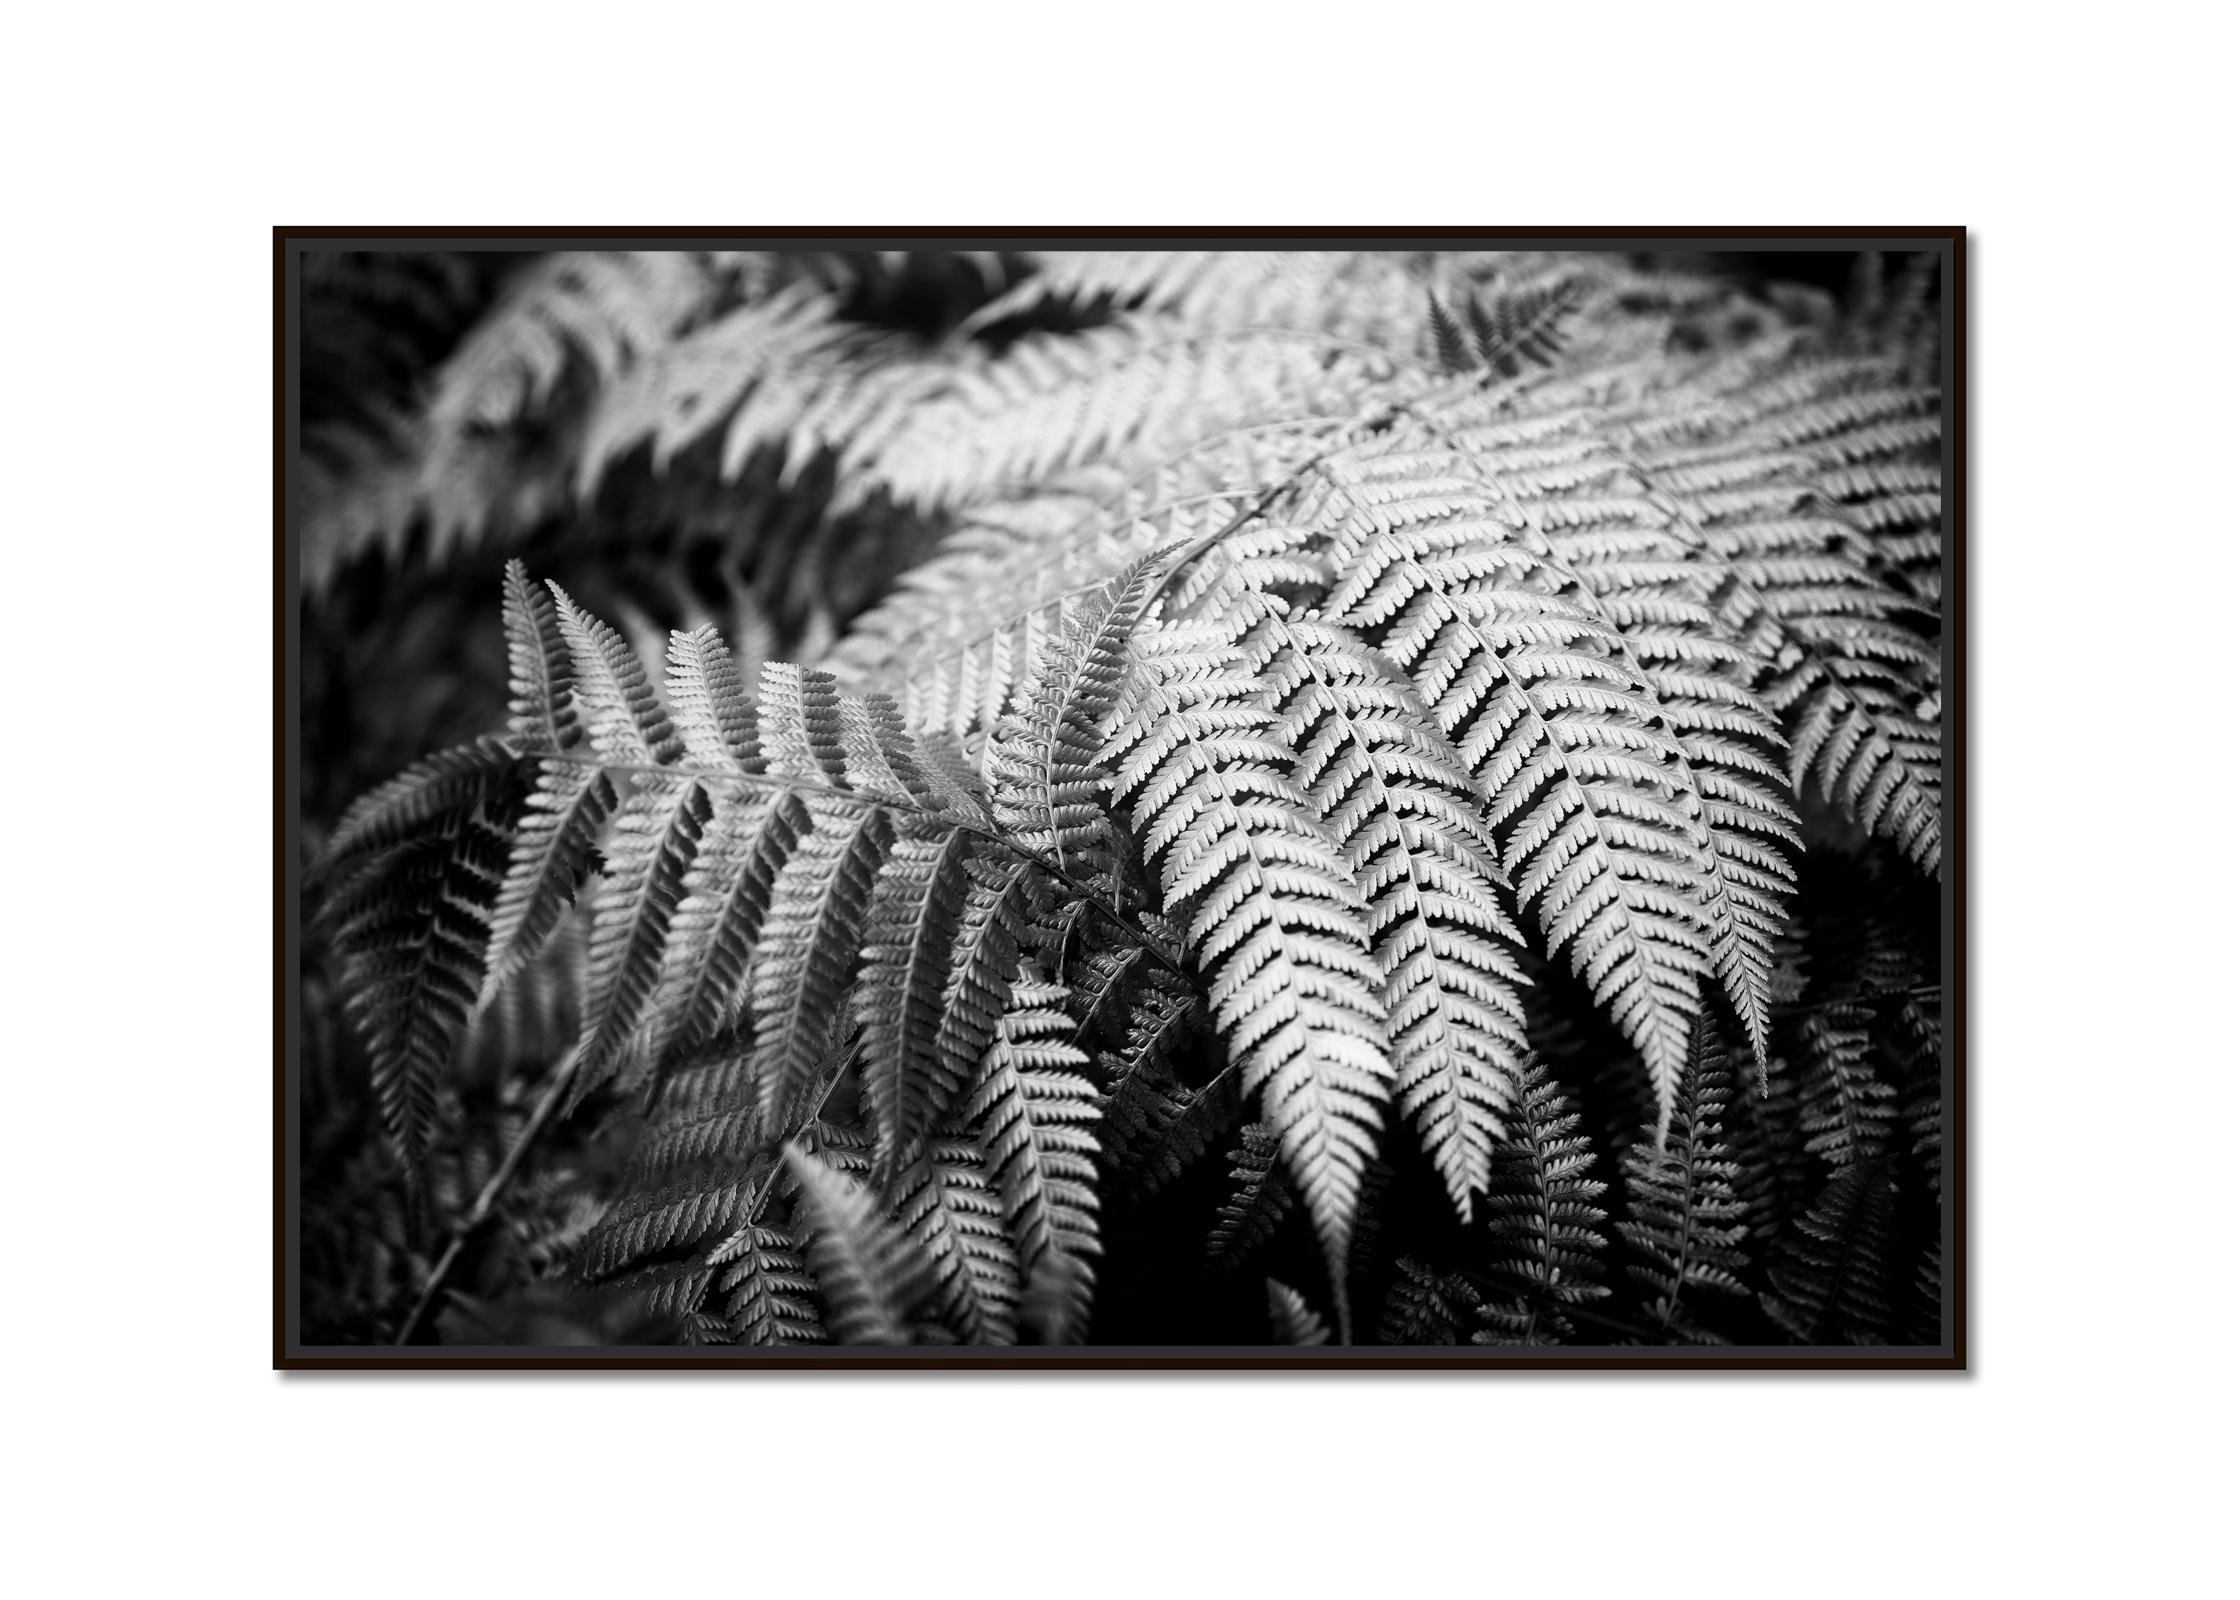 Polypodiopsida, Spain, black and white fine art photography, landscape, flora - Photograph by Gerald Berghammer